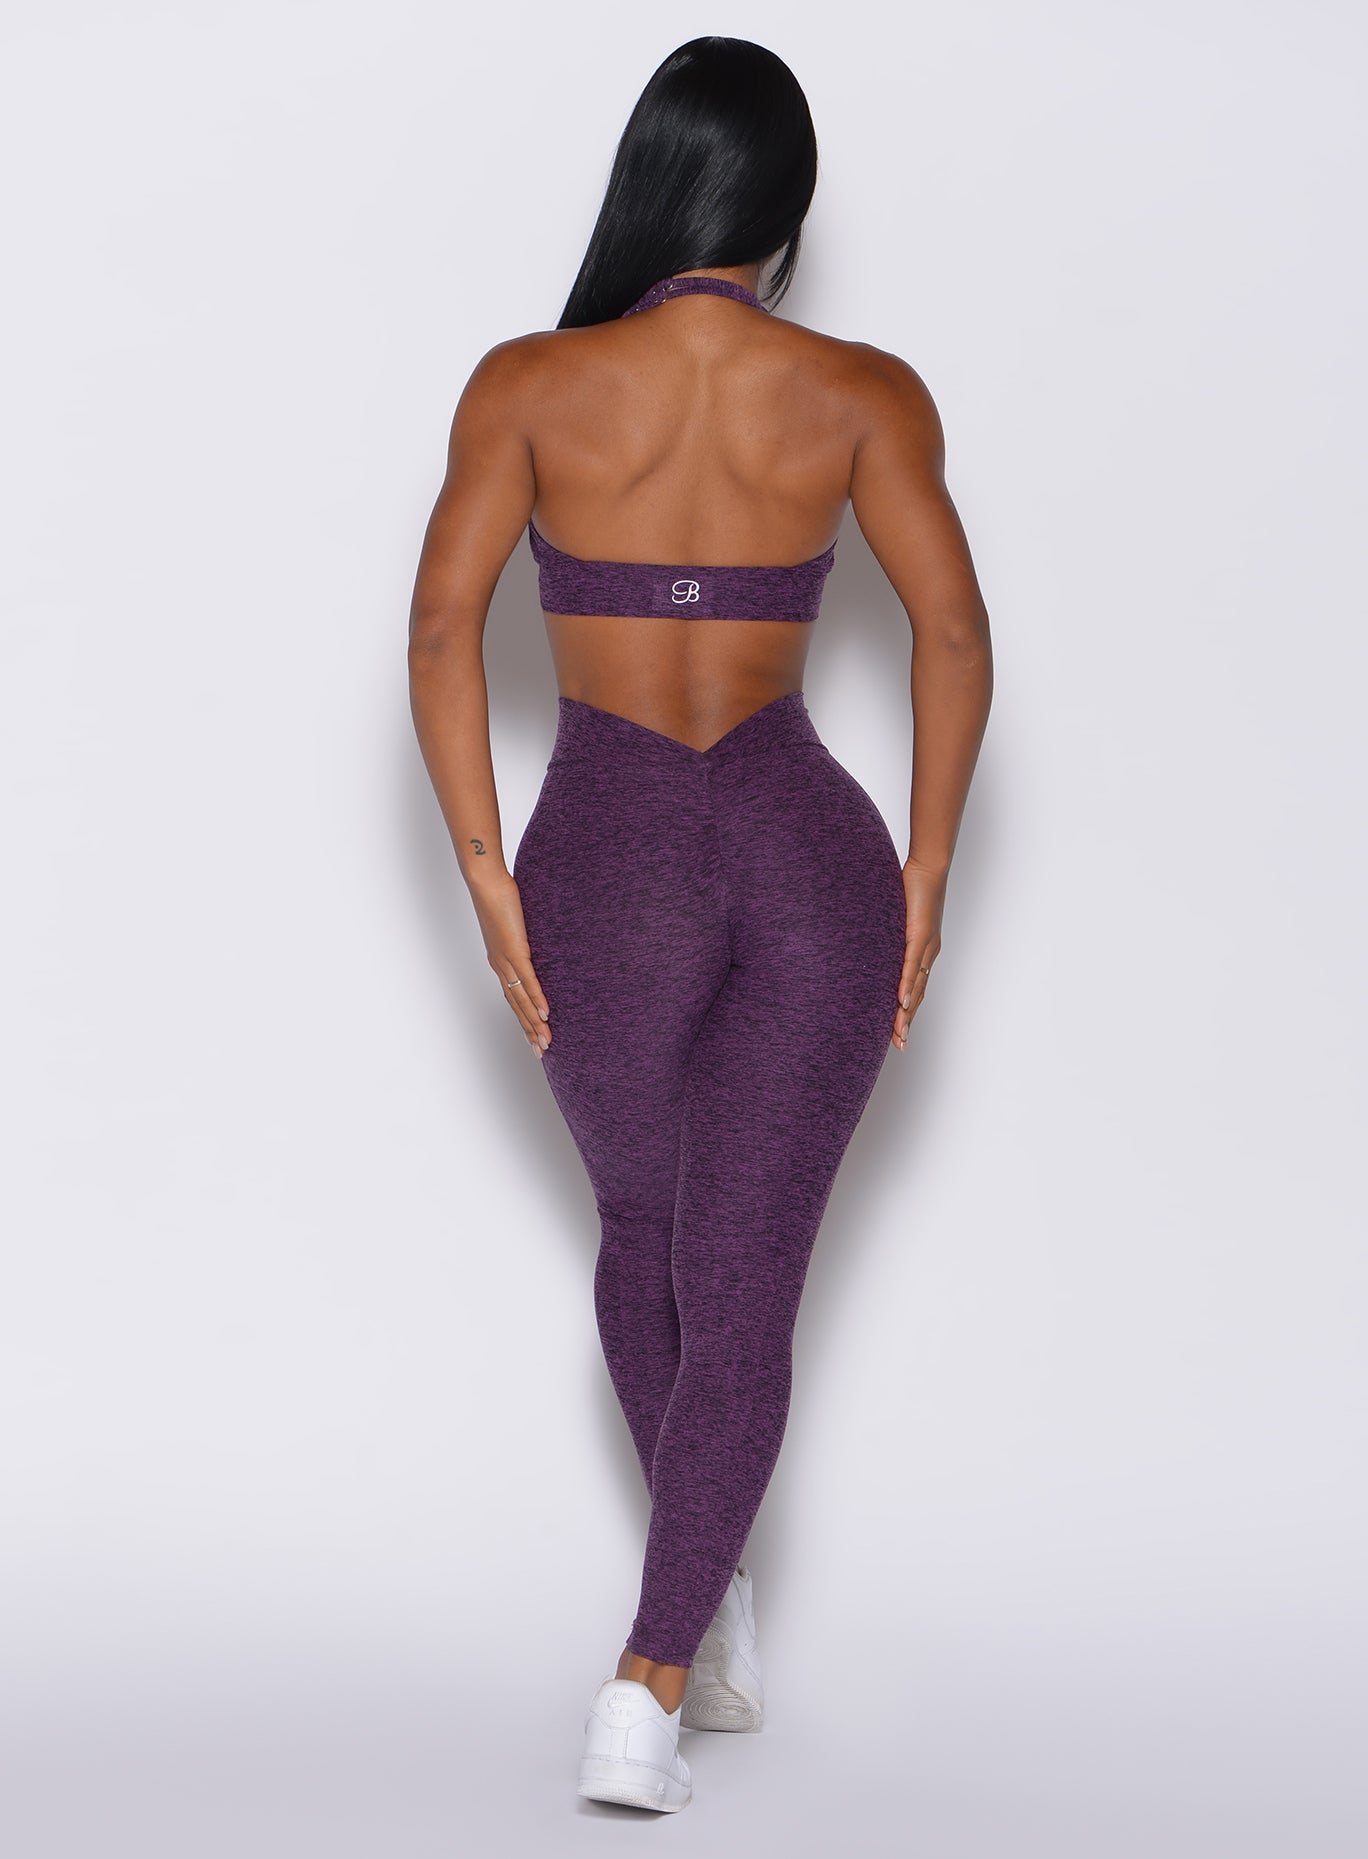 back profile view of a model wearing our V Back Leggings in purple passion color along with the matching bra